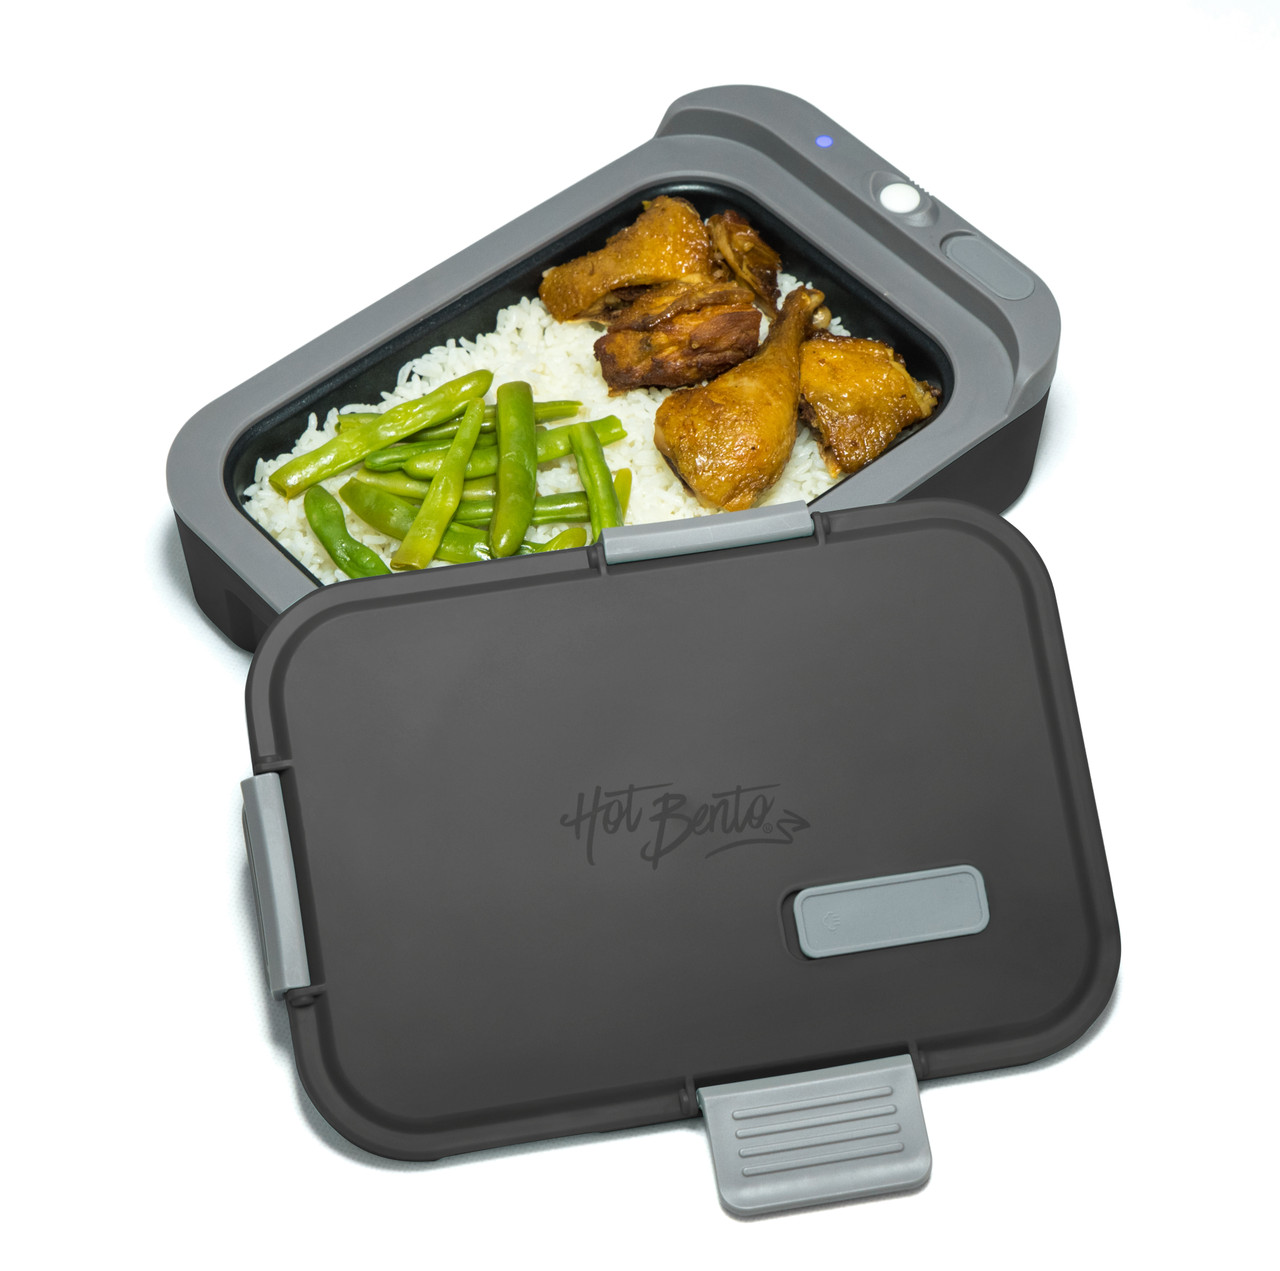 Bentgo Kids Lunch Box System Review and Demo 